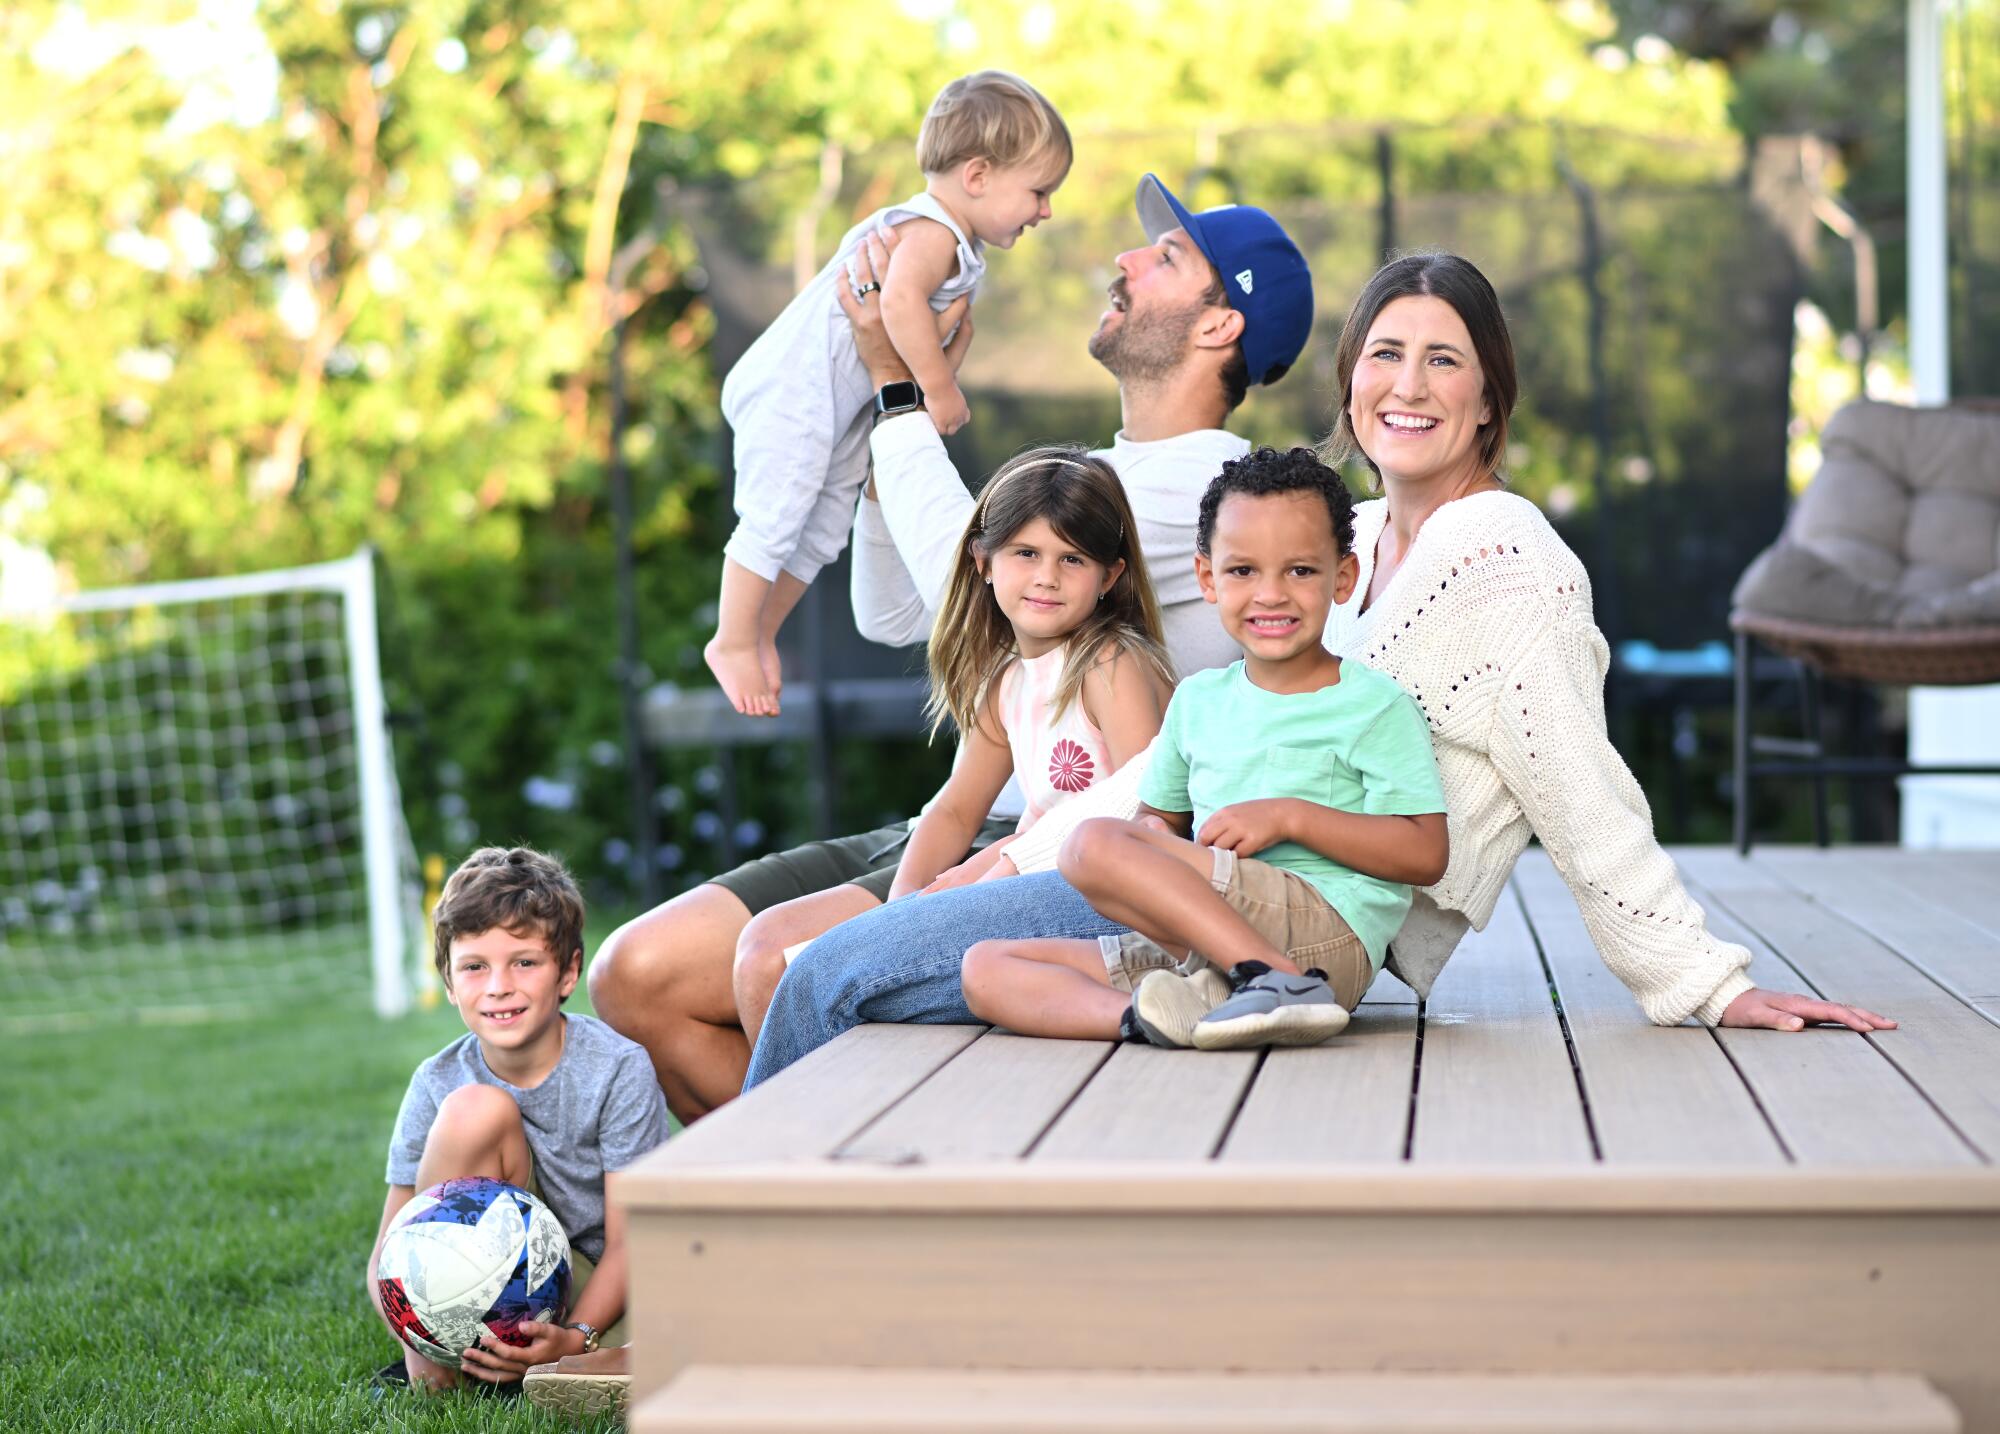 LAFC defender Ryan Hollingshead and his wife Taylor sit on their backyard deck with their children